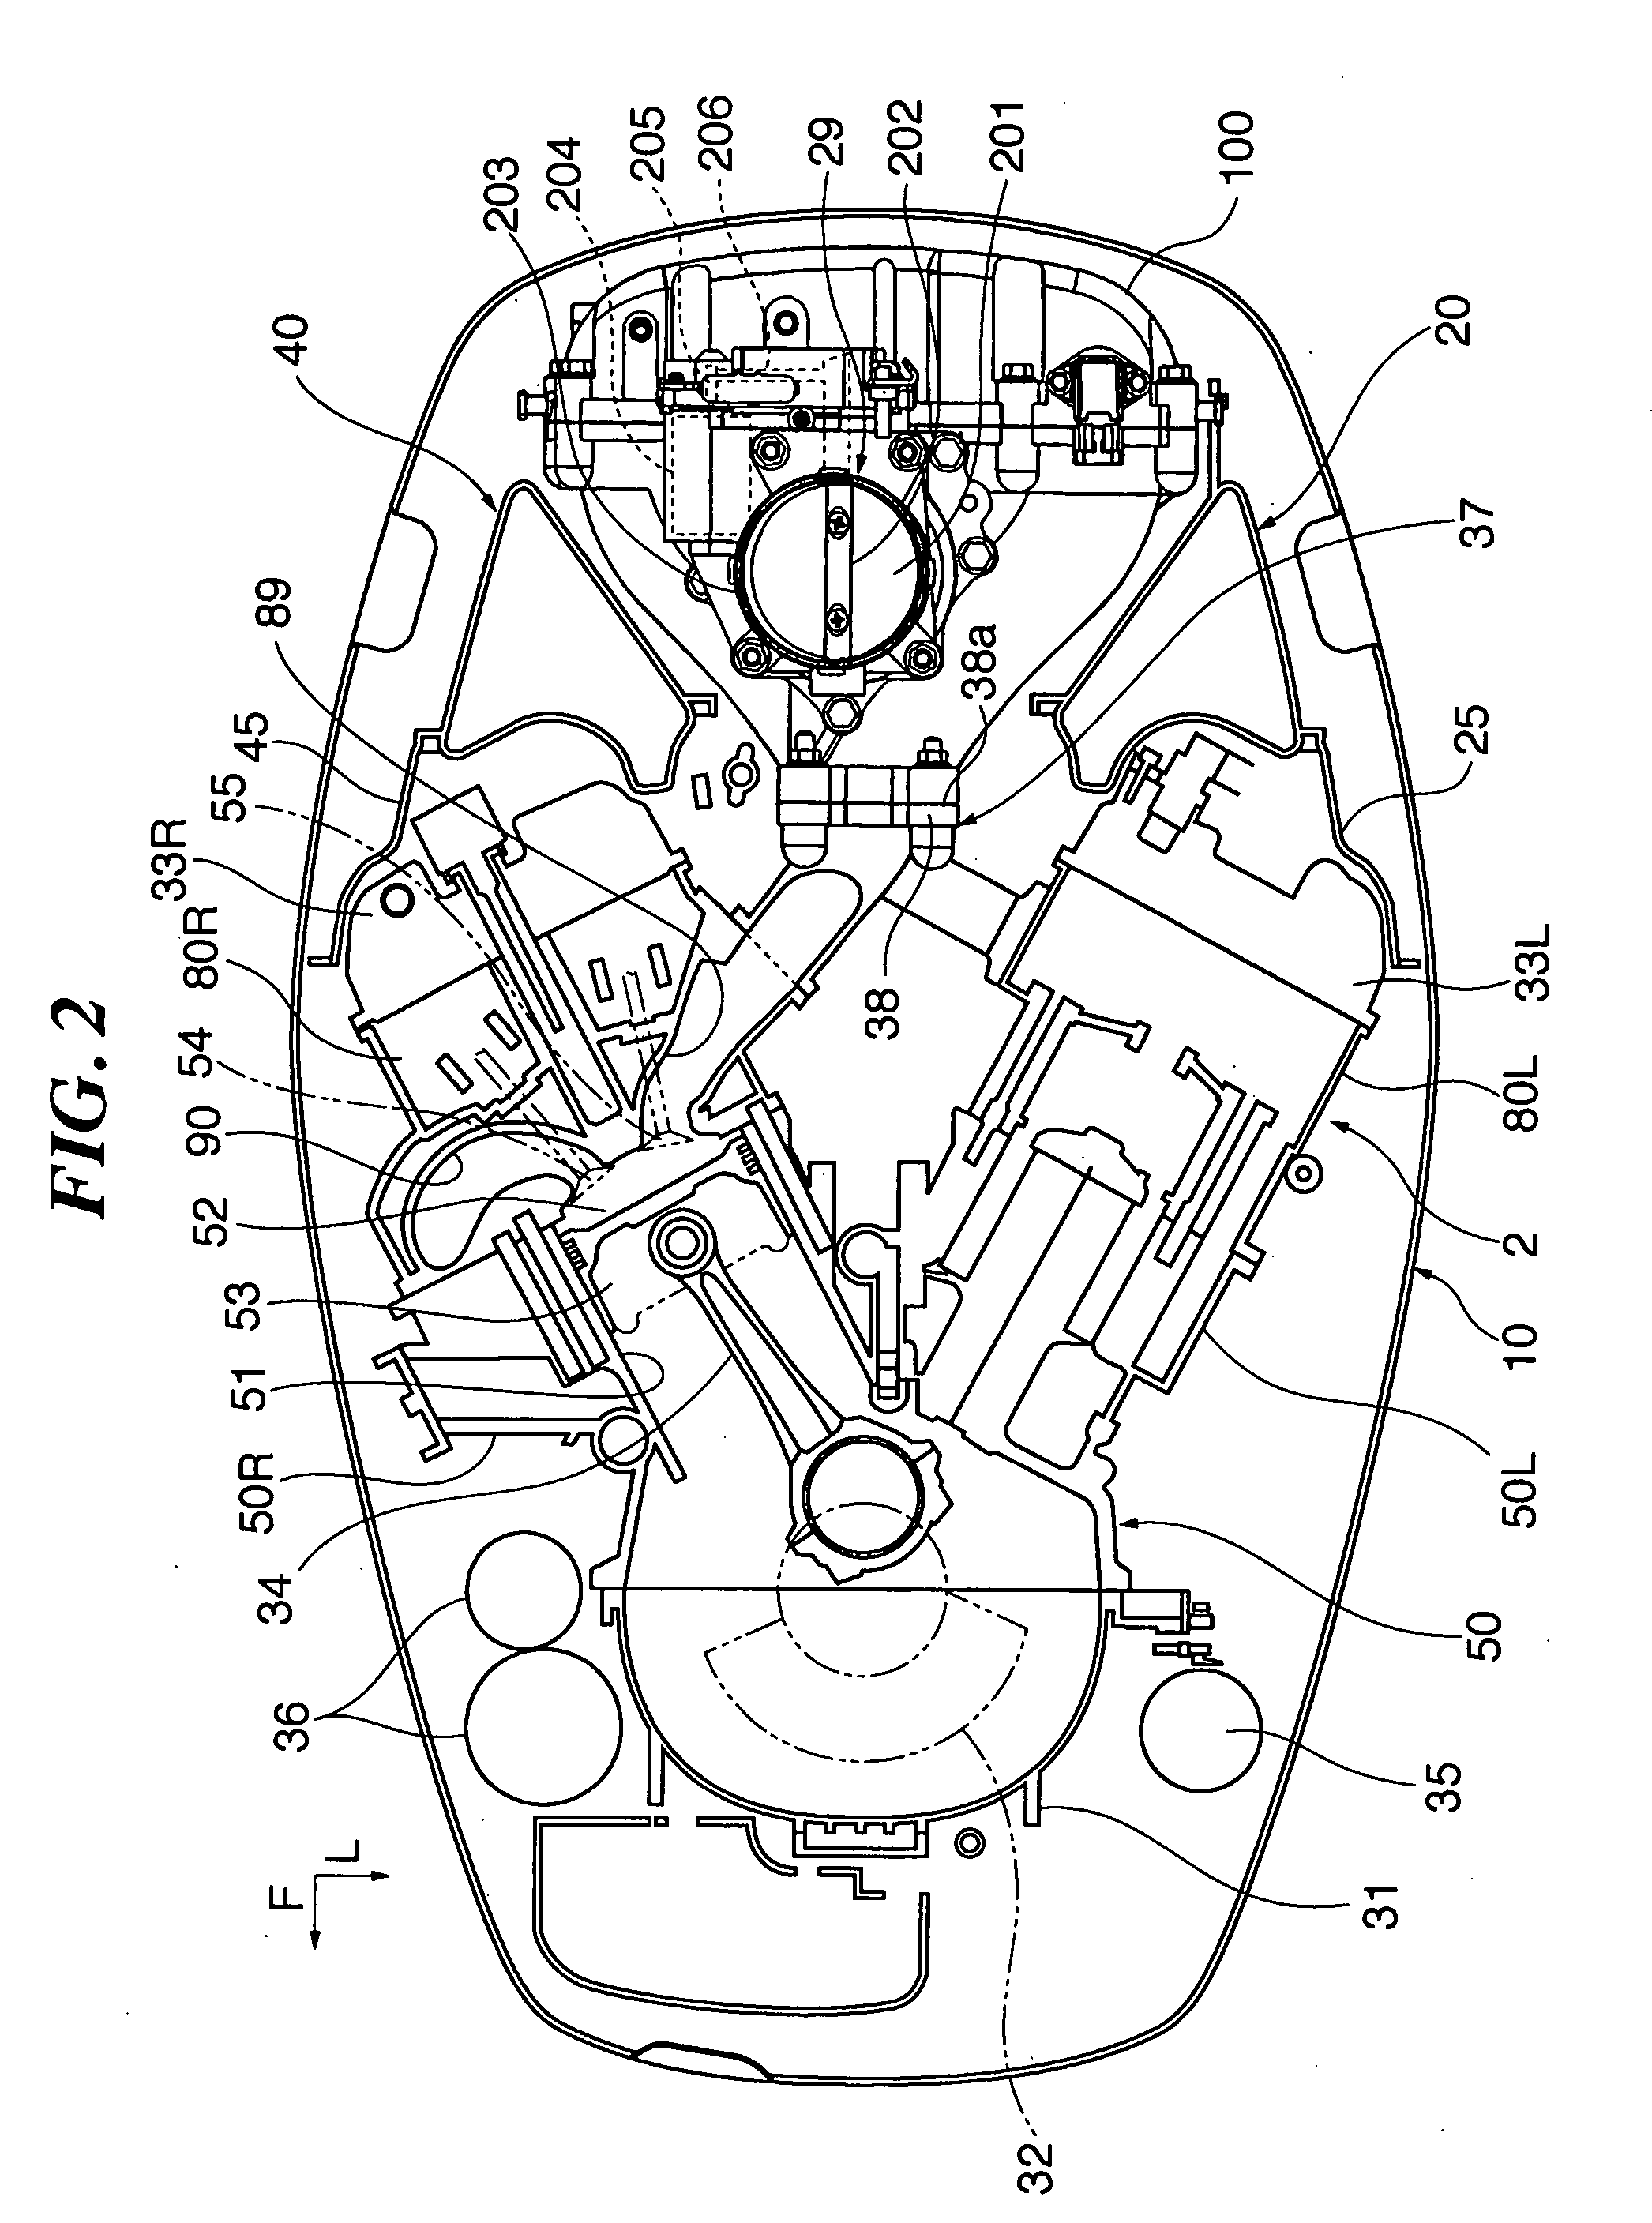 Intake device for outboard motors